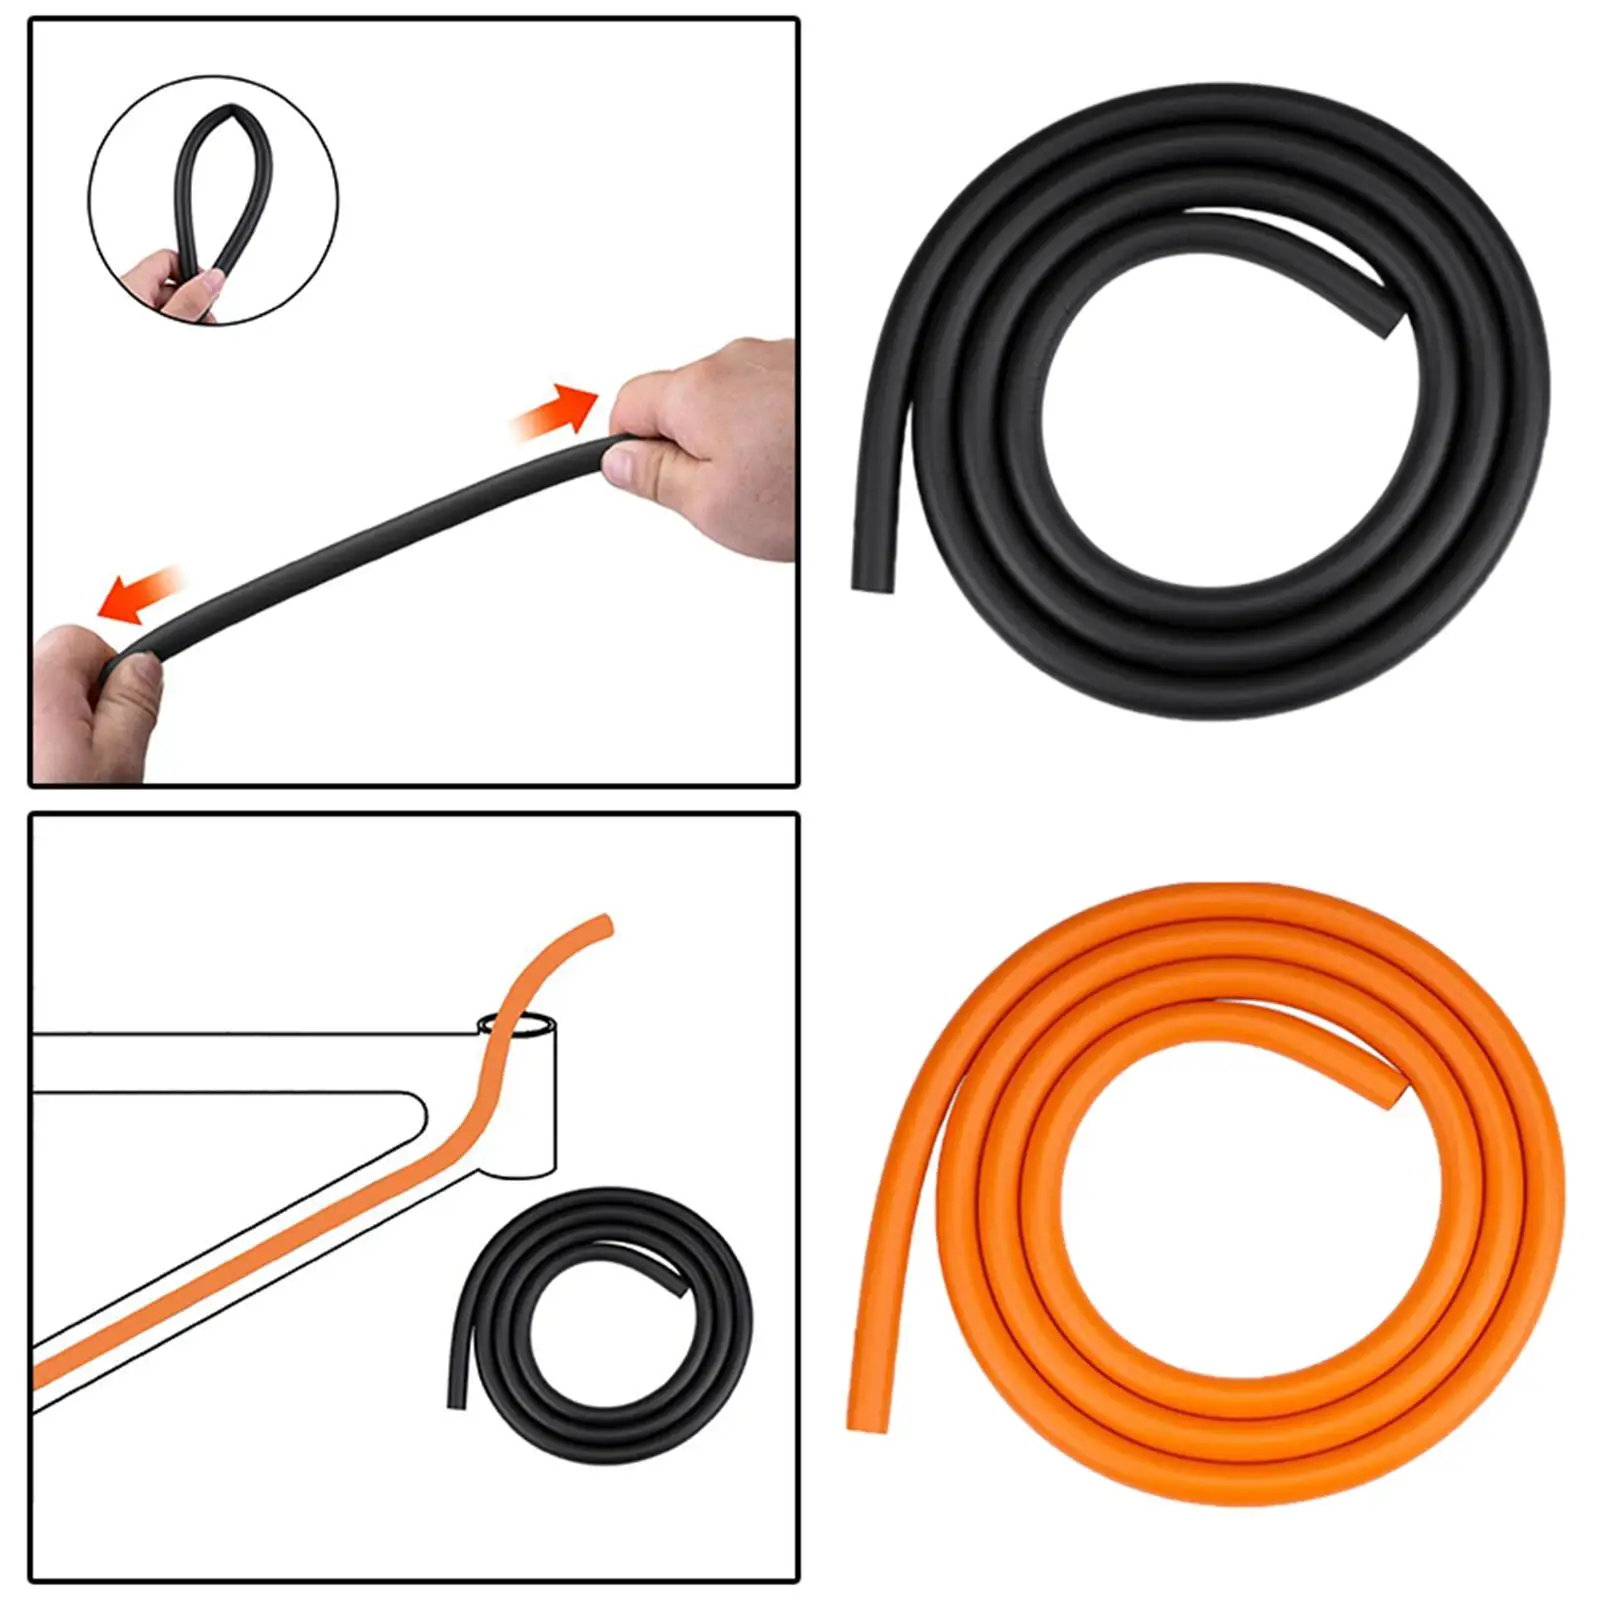 10M Bicycle Inner Line Cable Housing Damper Noise Prevention 6mm Foam Tubing Hydraulic Shifter Cable Housing for Road Bike